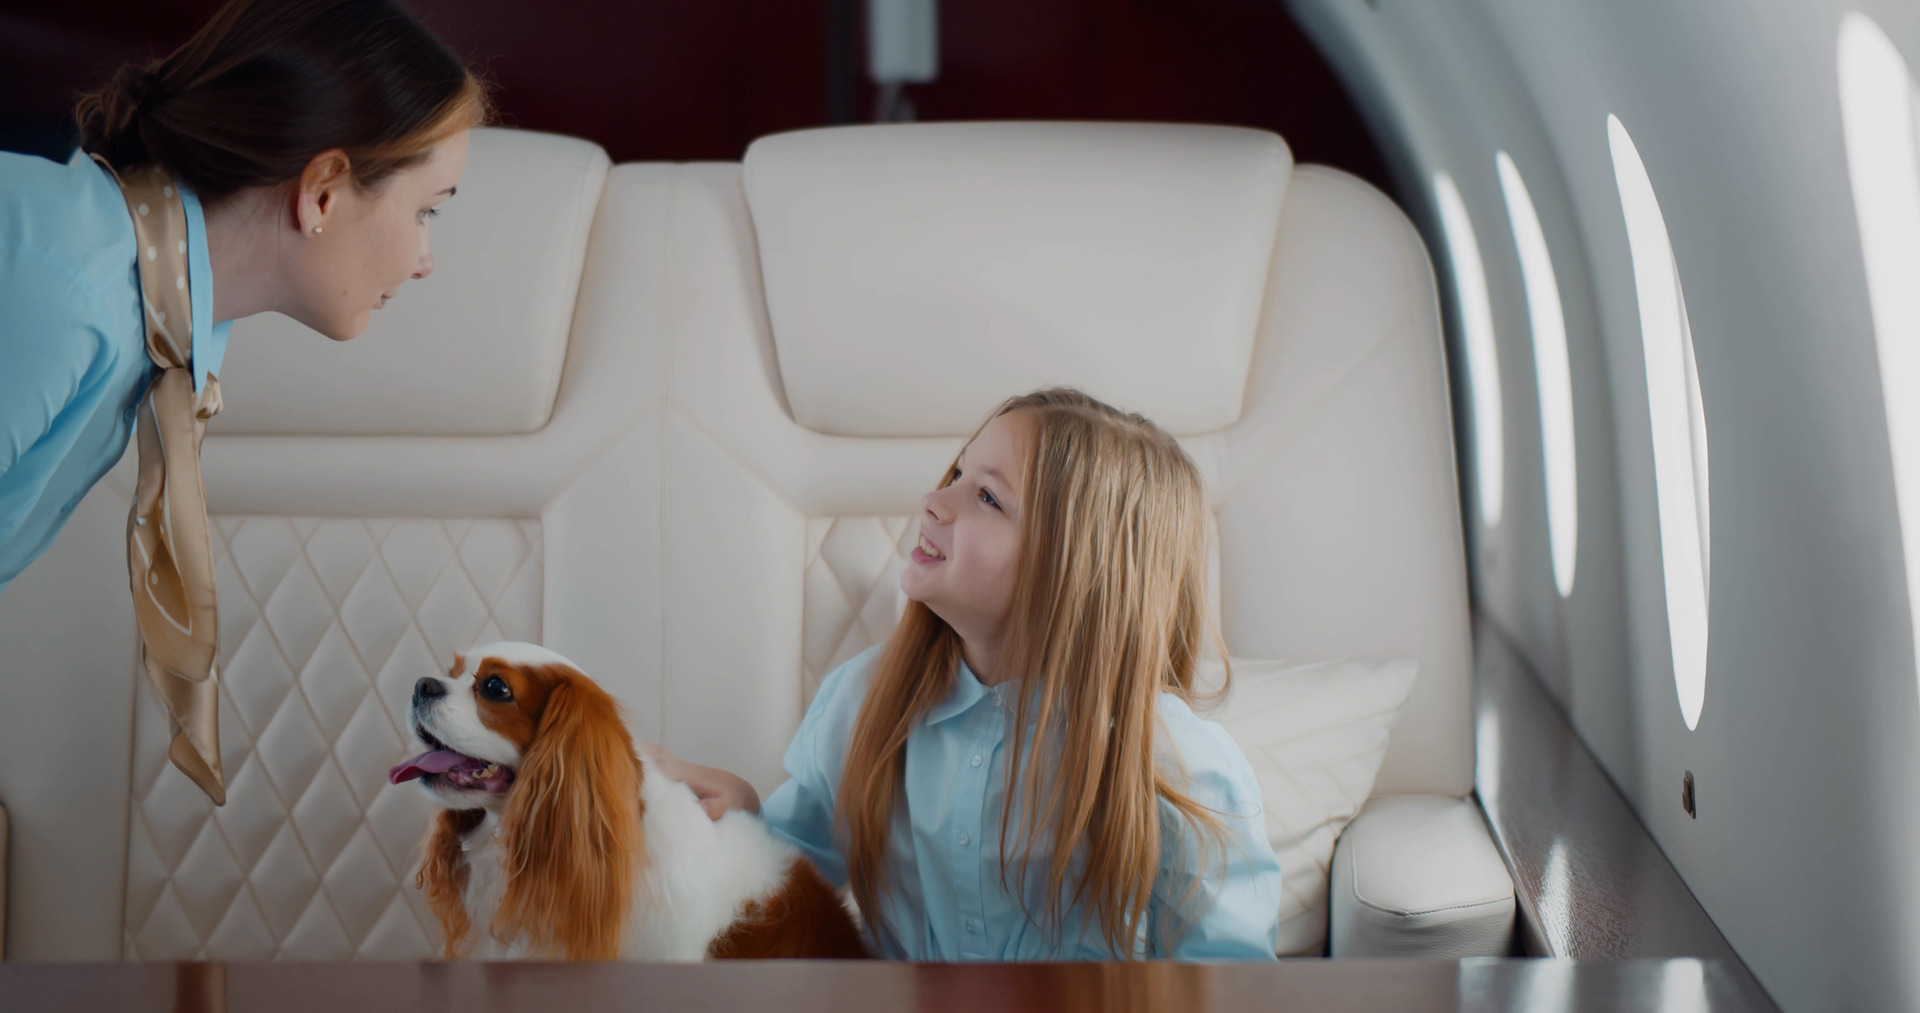 A flight attendant taking care of a young girl and a dog on board an airplane